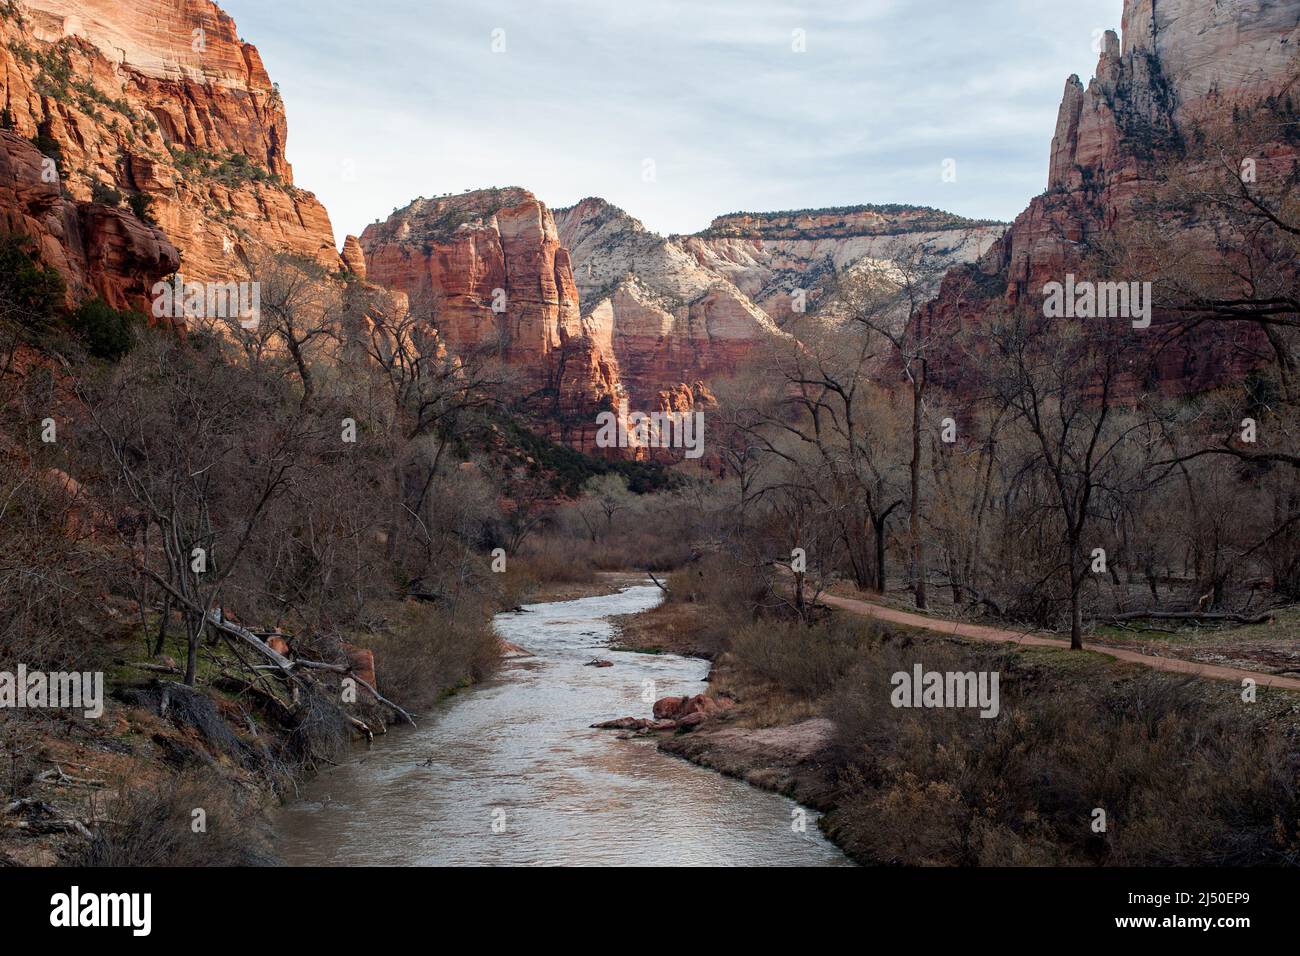 Zion Canyon as seen from the Emerald Pools trail bridge.  Looking up canyon.  Virgin River at photo bottom. Stock Photo